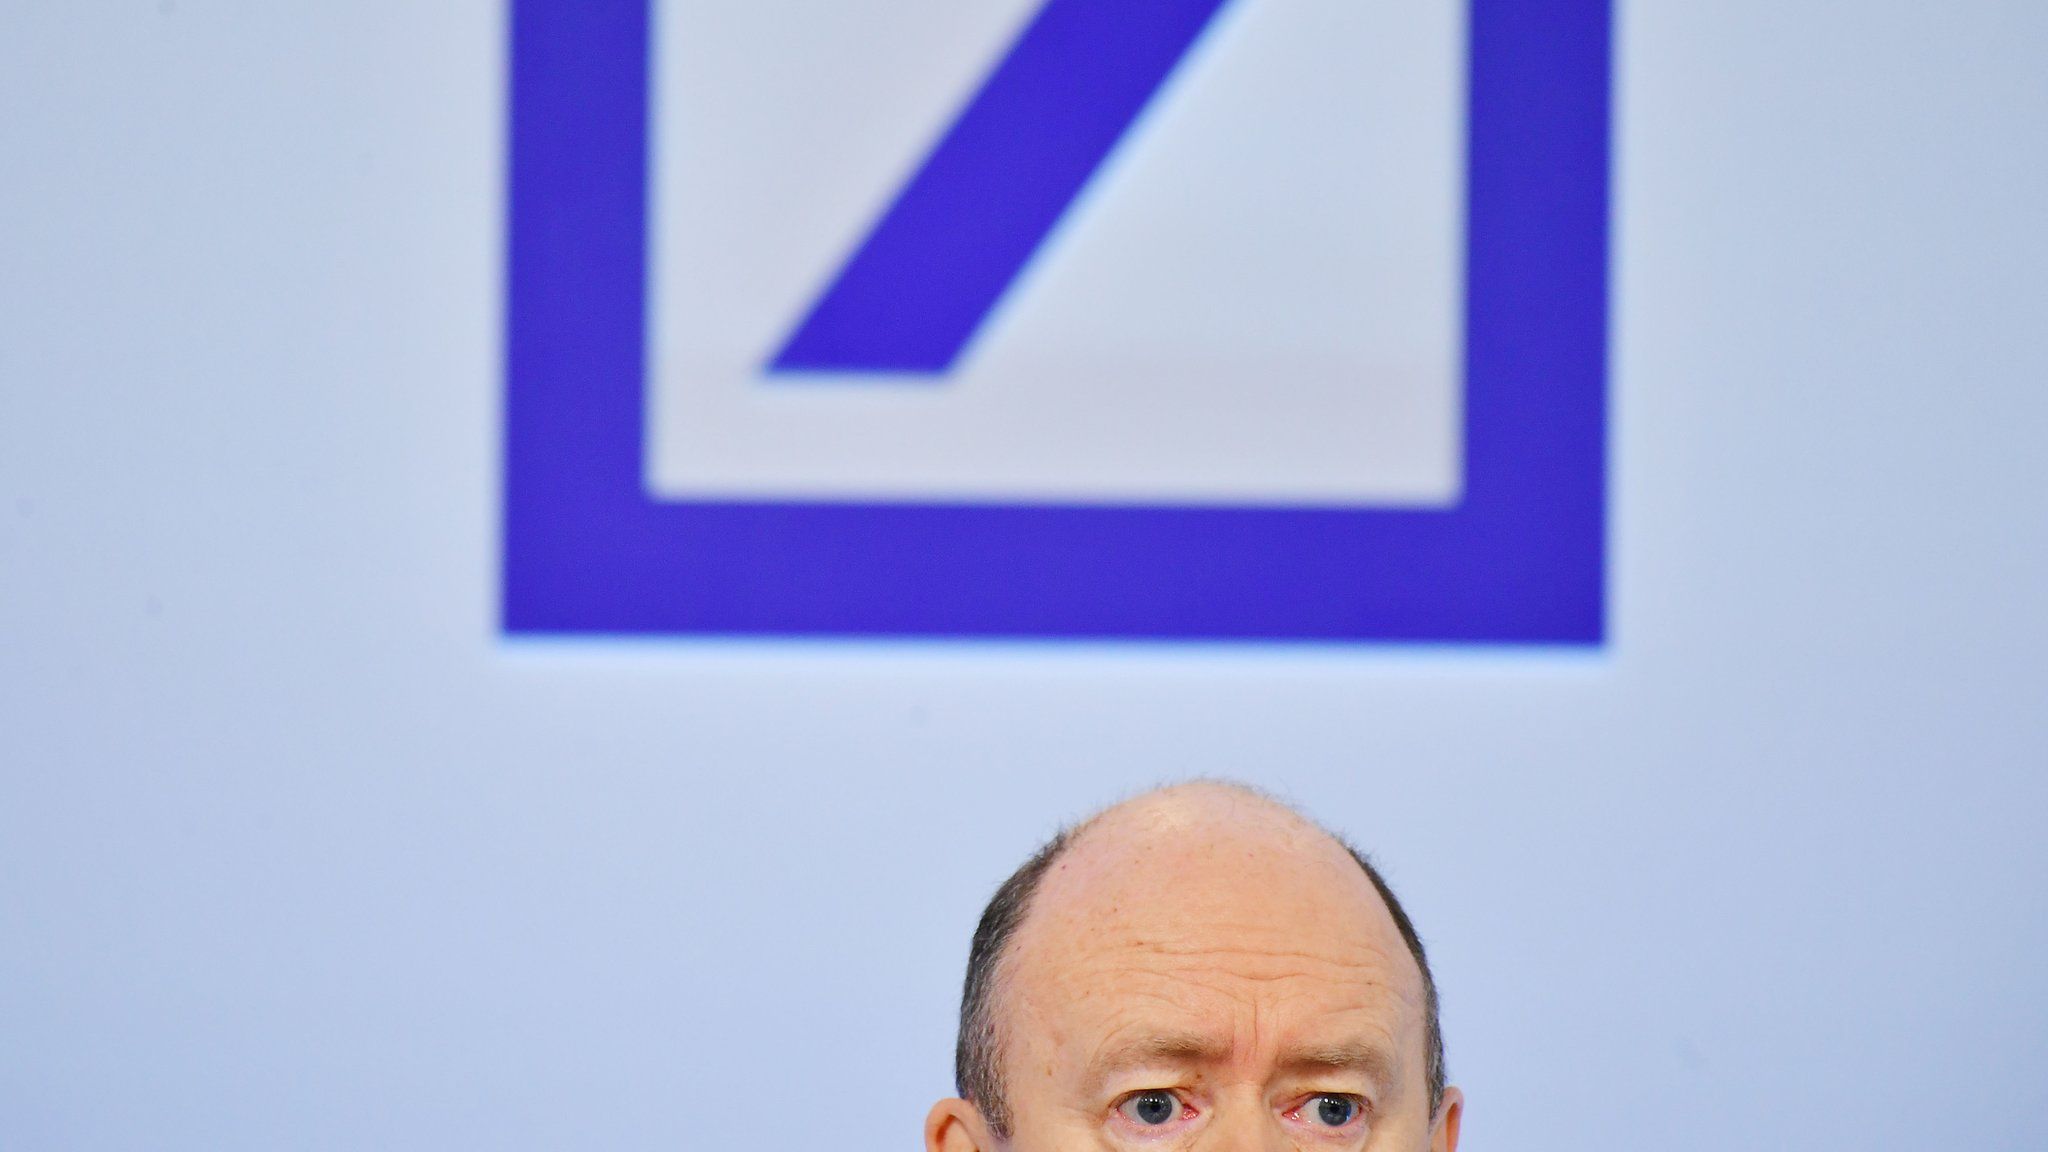 John Cryan, CEO of Deutsche Bank, presents the company's financial results for 2016 during the annual Deutsche Bank press conference